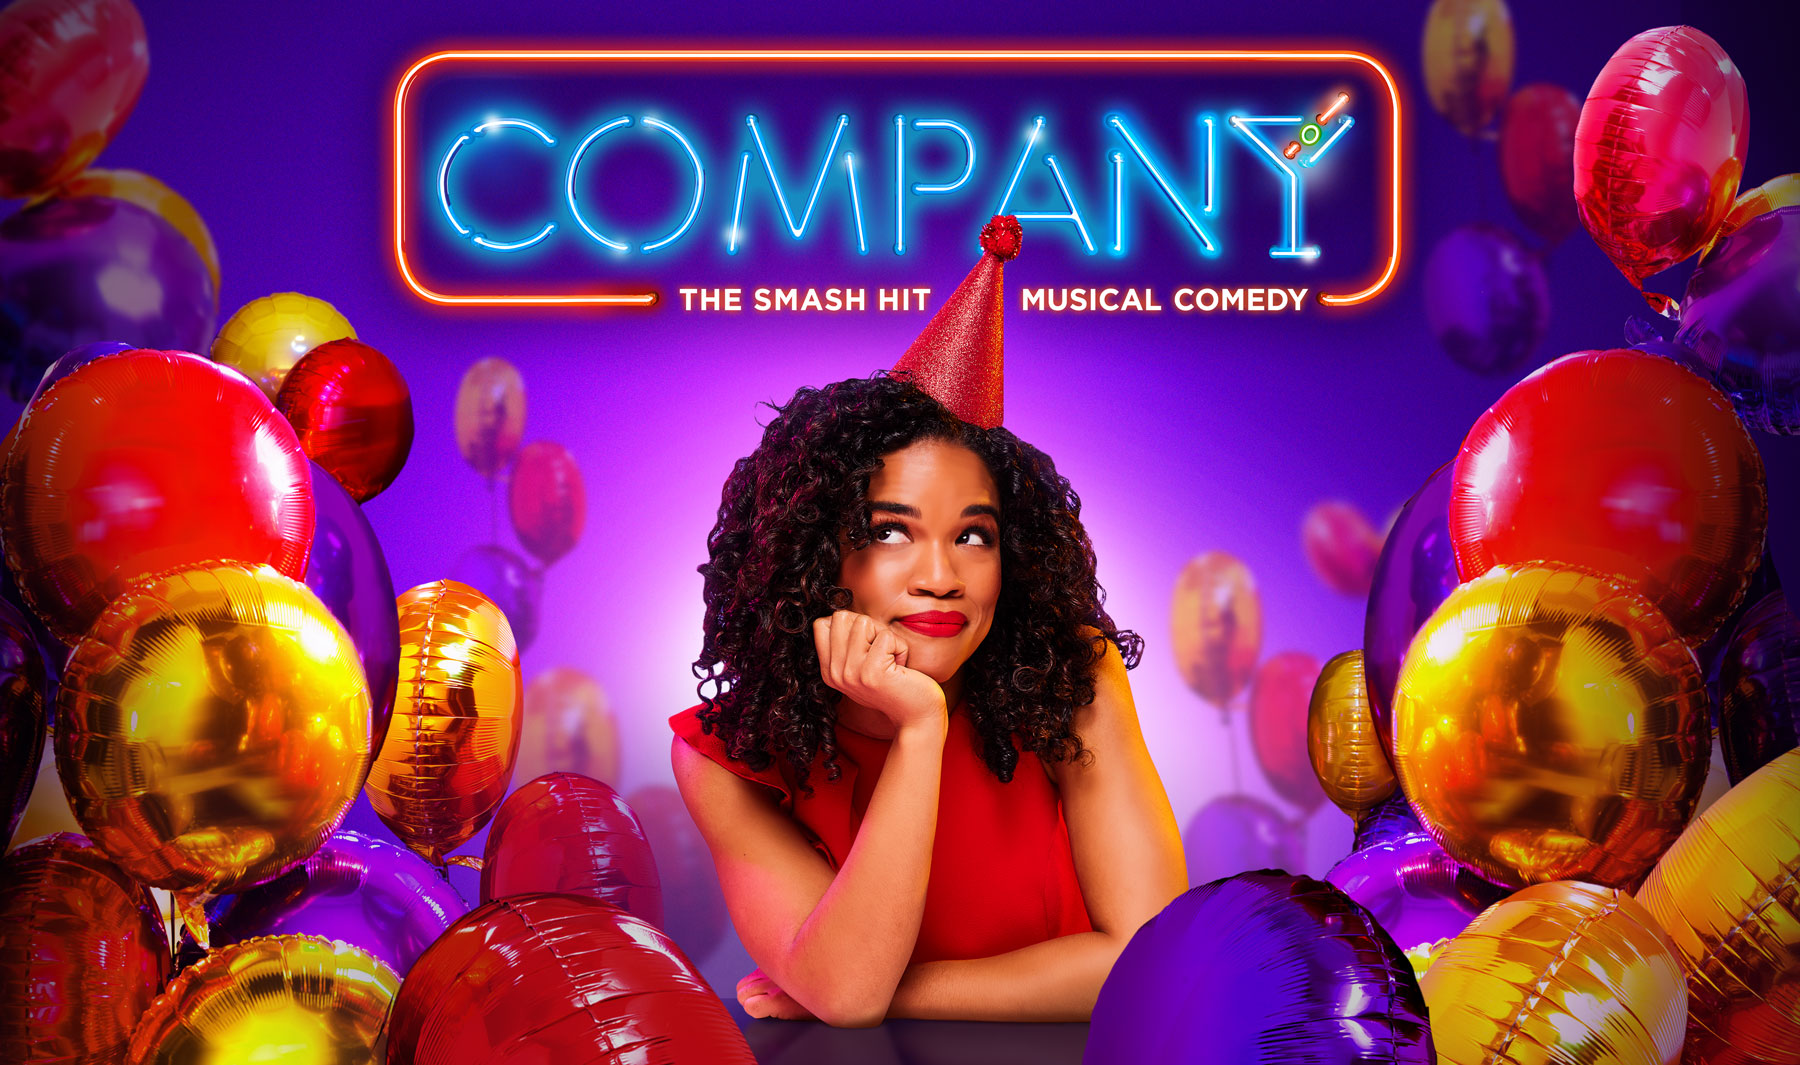 The graphic for Company. "Company" is in neon lights, with "The smash hit musical comedy" underneath the title. Bobbie, the main character, wears a red party hat and is surrounded by purple, red, and yellow balloons.